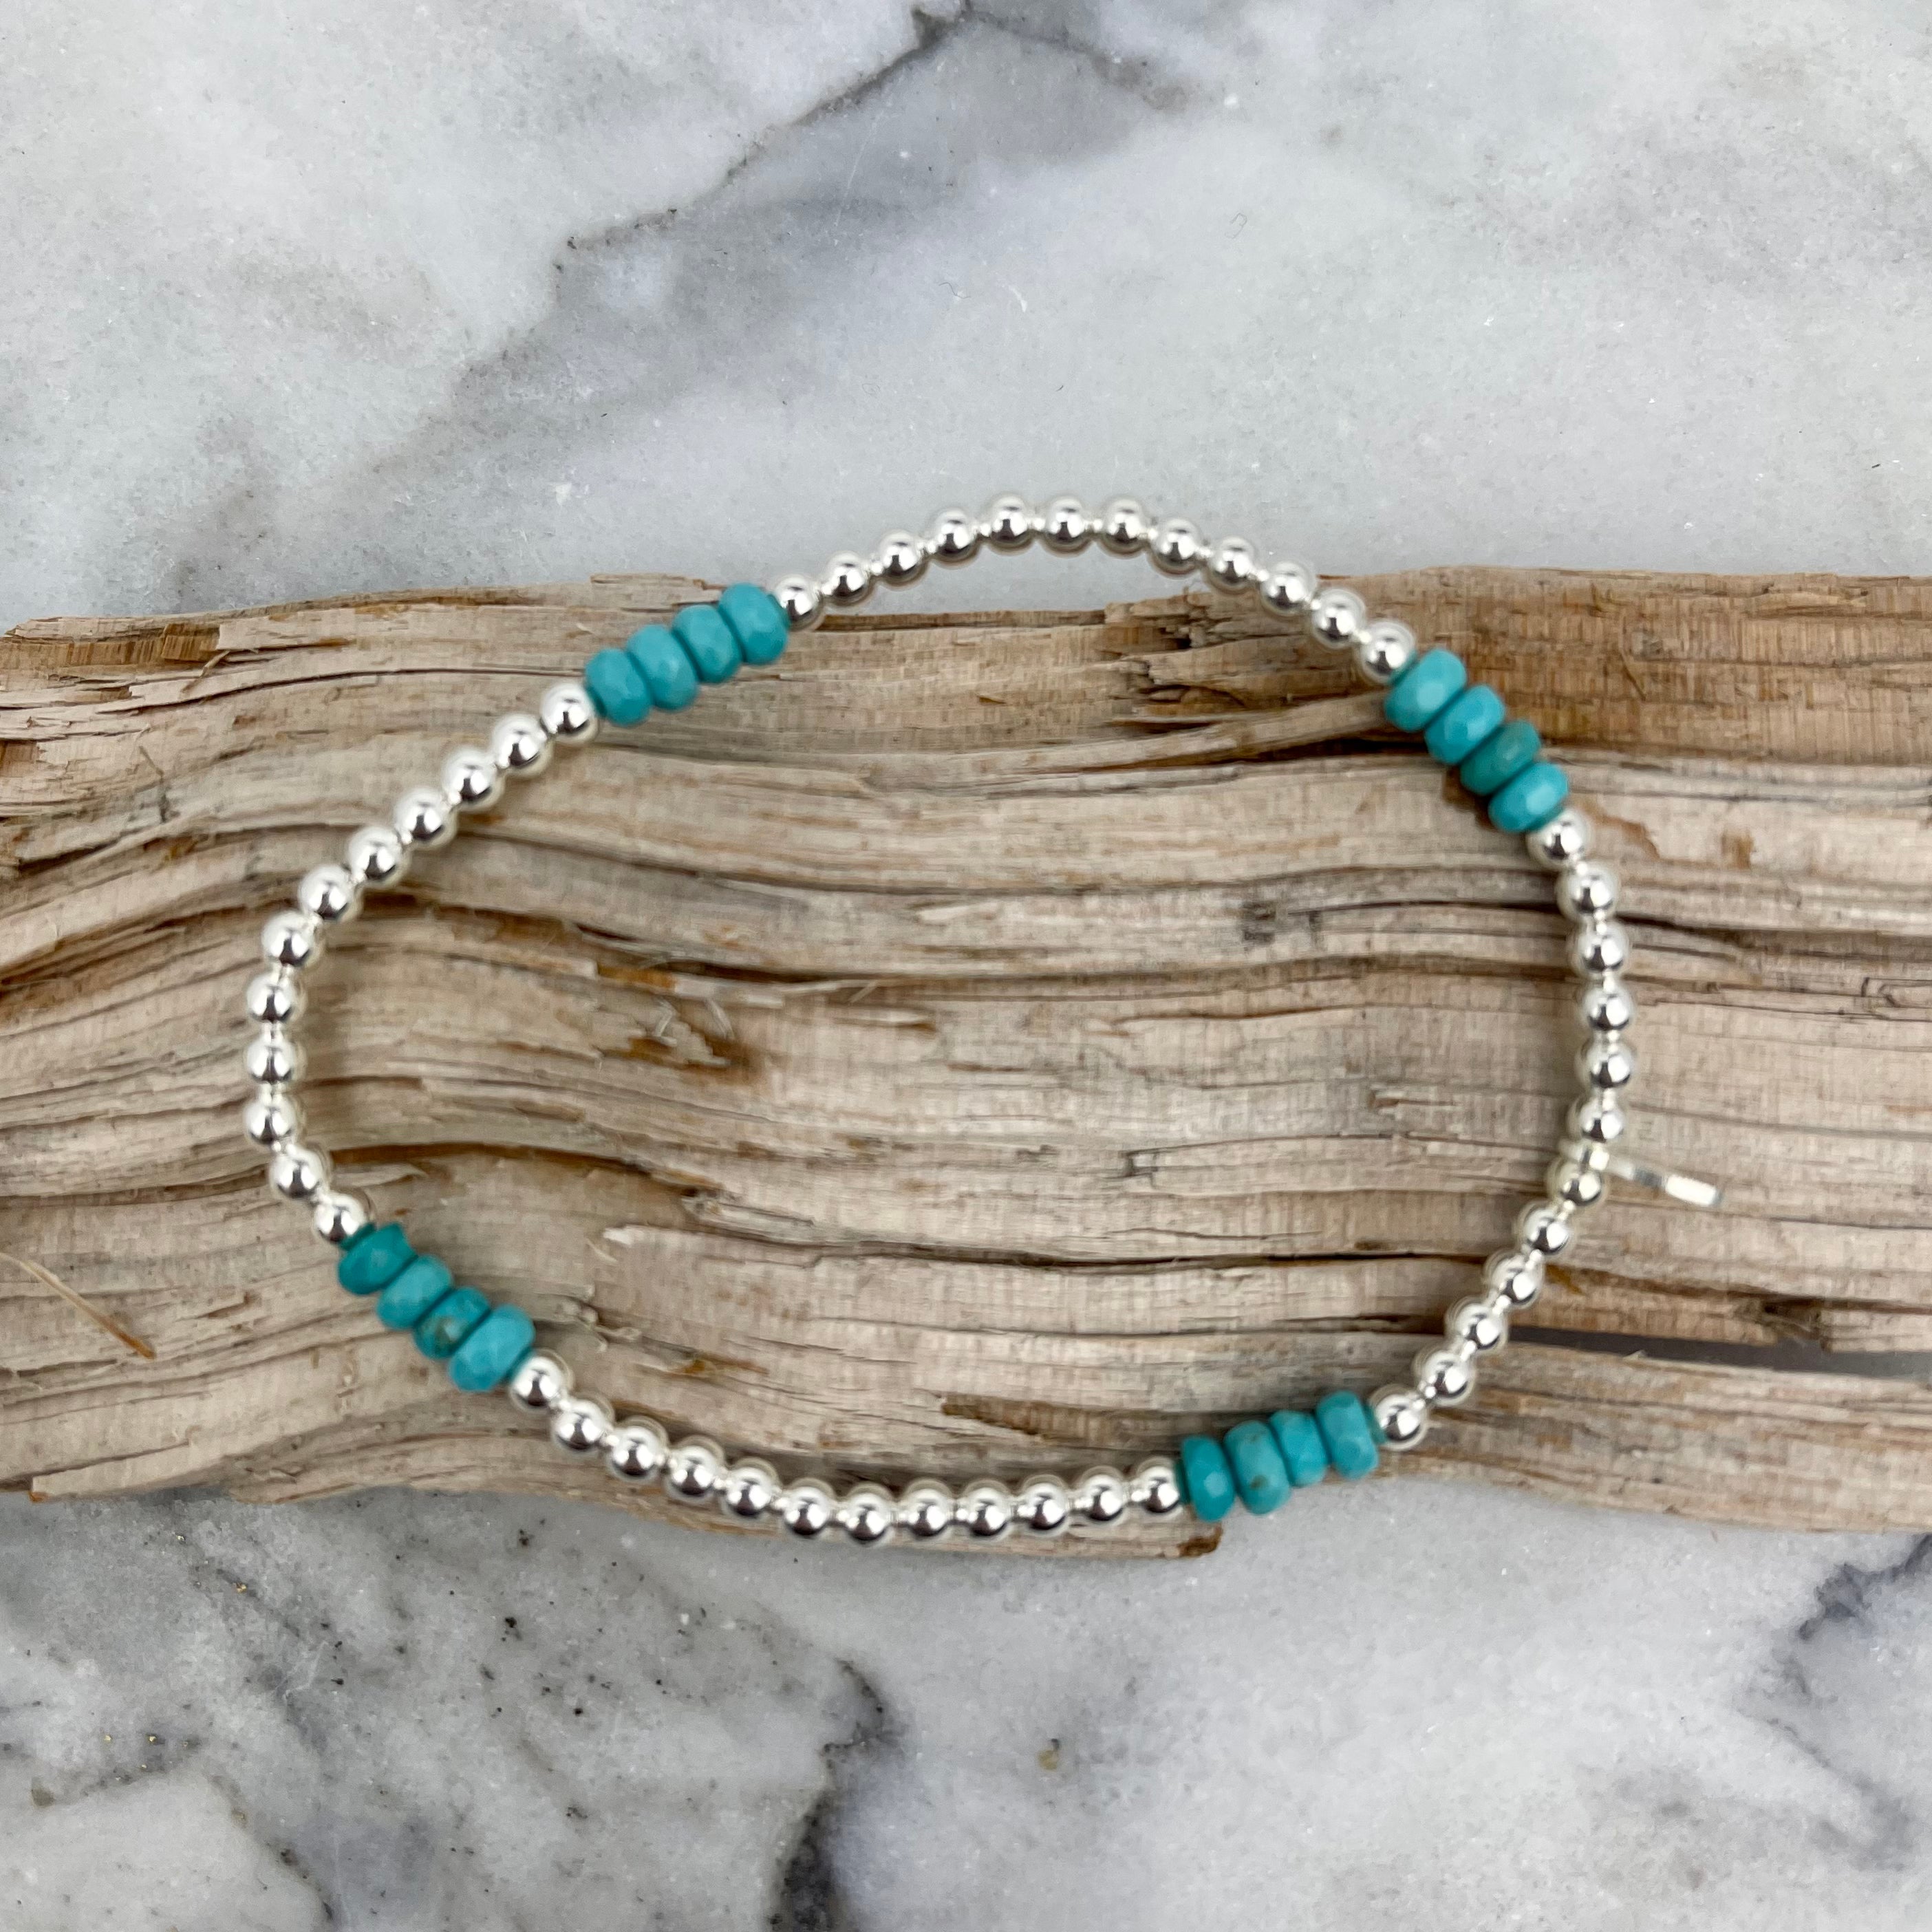 Sterling Silver 3 x 4mm Small Bead Balls & Turquoise 17.5cm Stretch Bracelet - STERLING SILVER DESIGNS